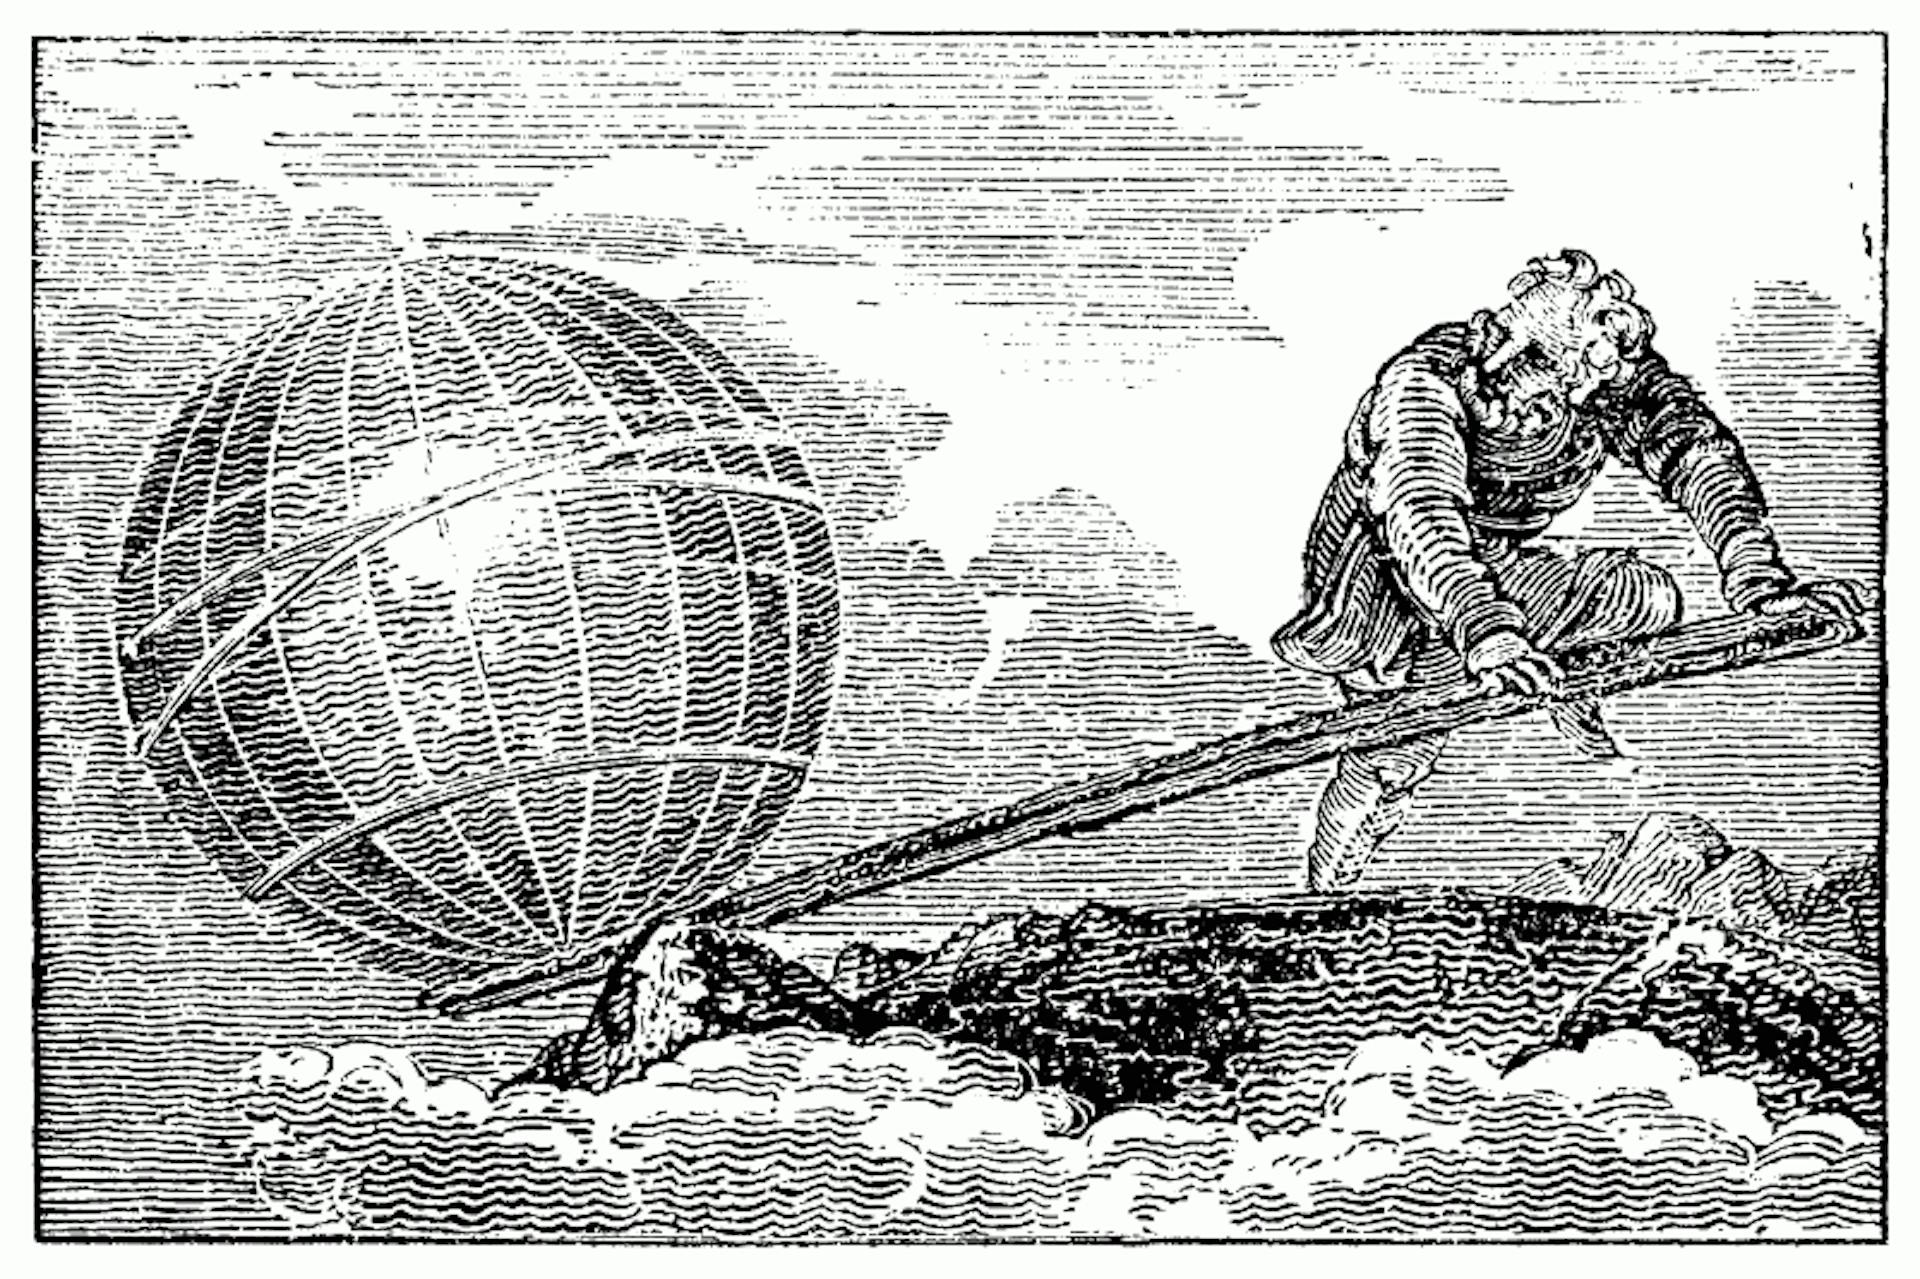 Archimedes understood doing more with less. (Mechanics Magazine, 1824)